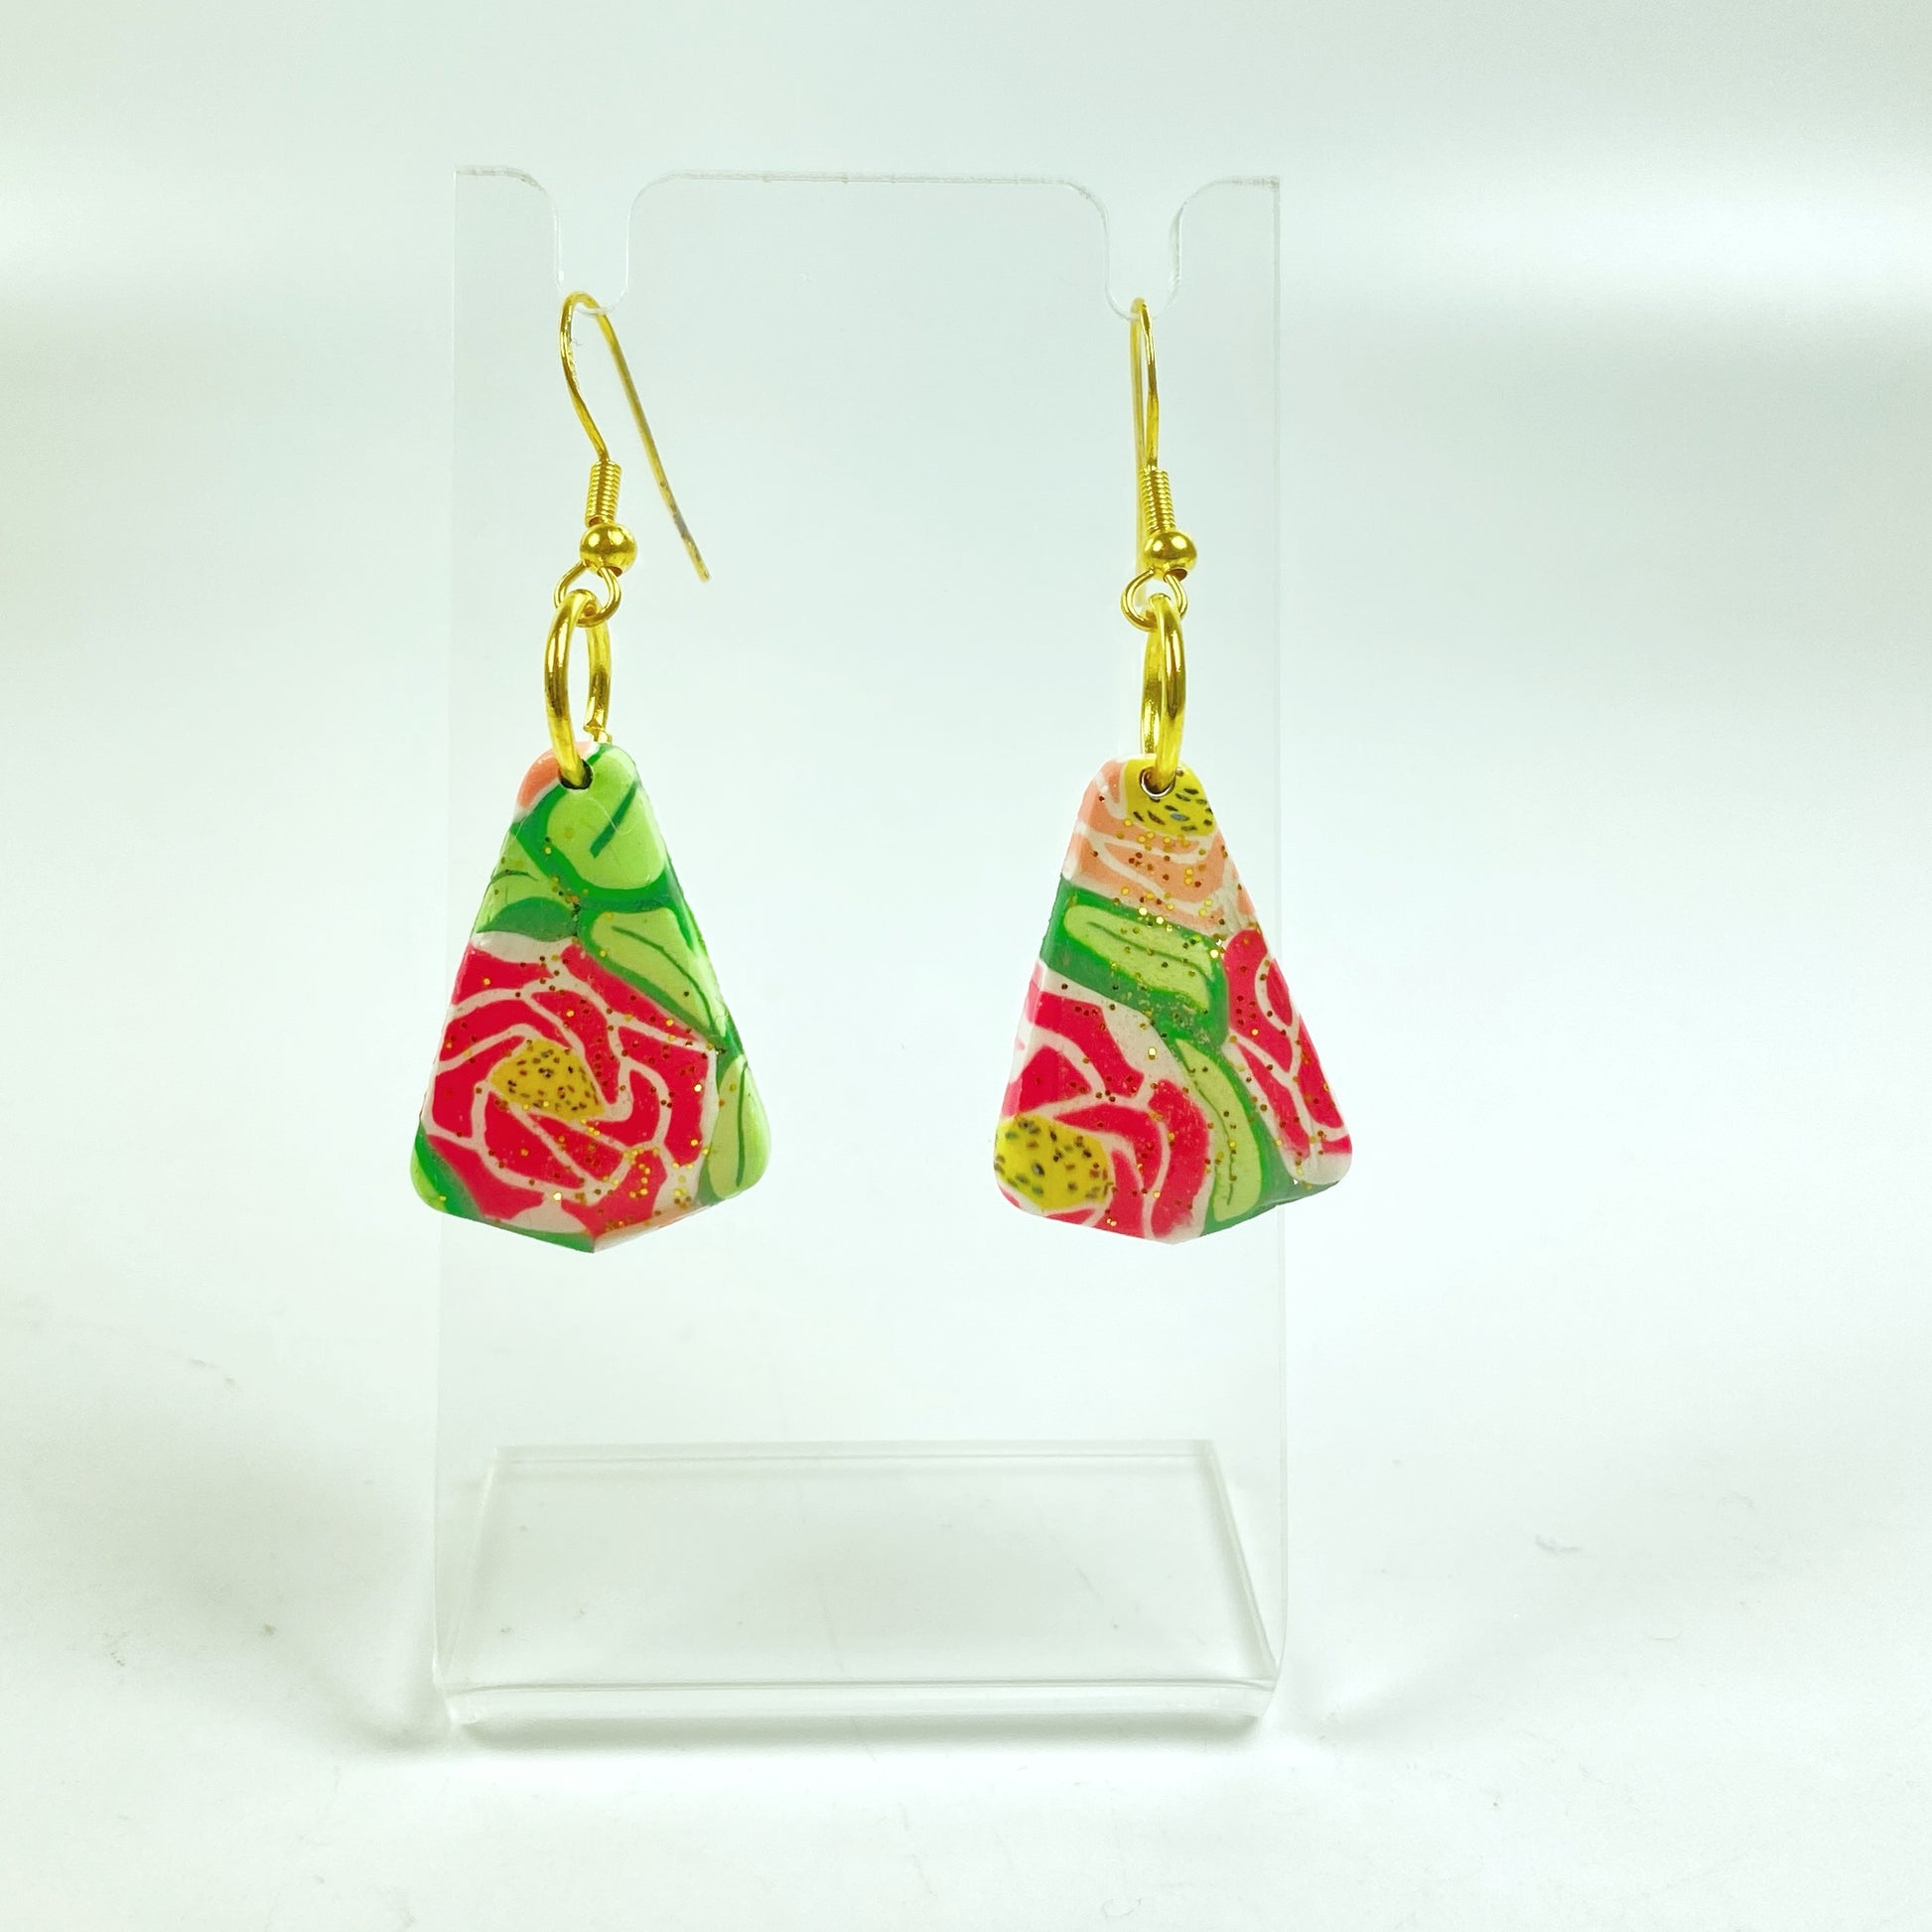 Whispering Roses Handmade Polymer Clay Dangle Earrings on a small acrylic display stand